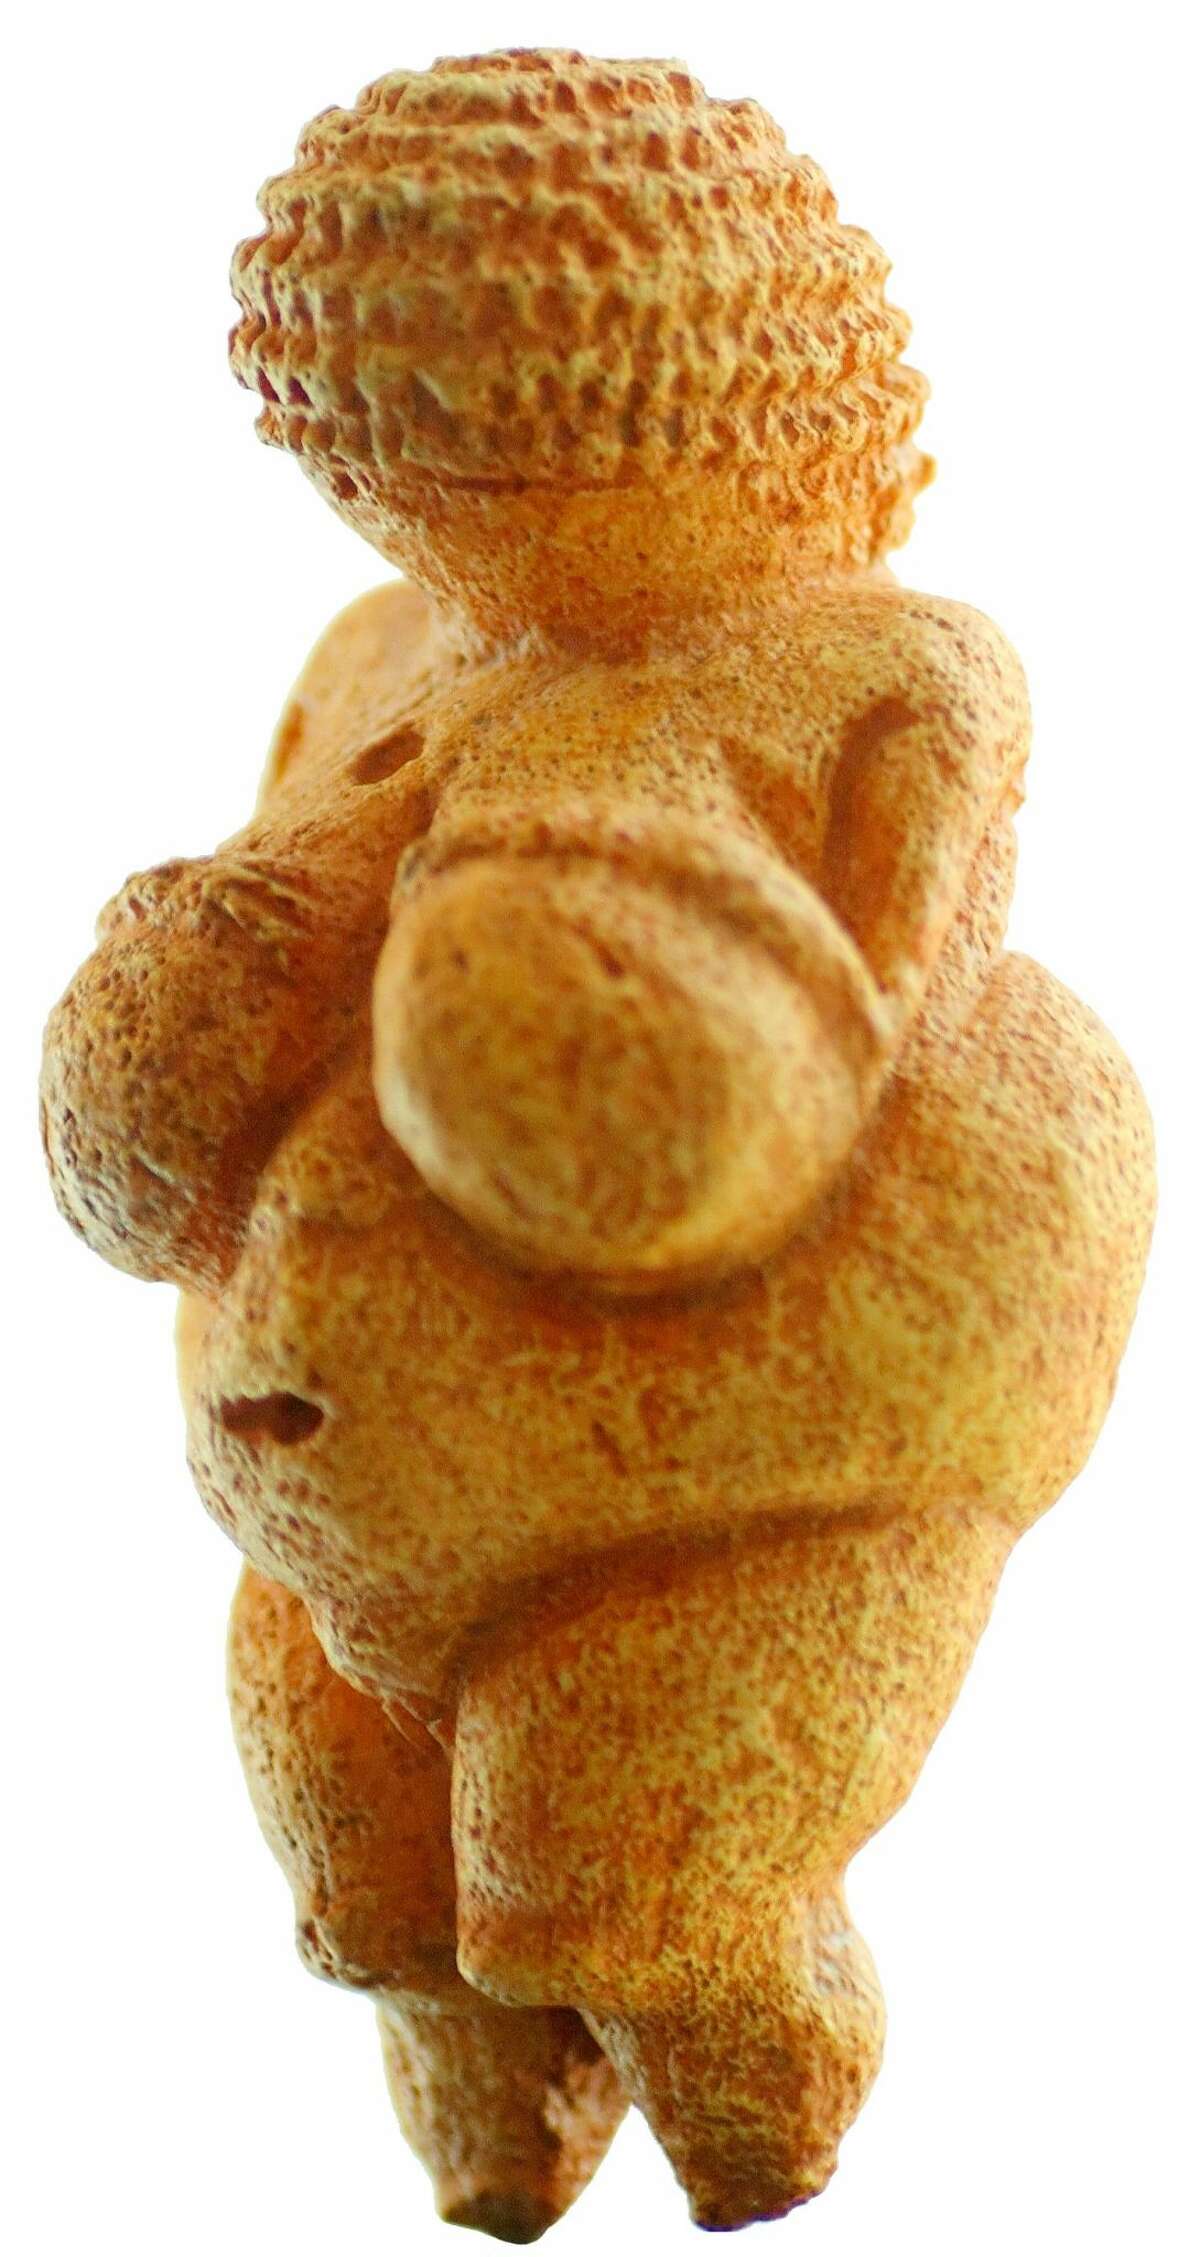 The Venus of Willendorf is a 4.4 in Venus figurine estimated to have been made between about 28,000 and 25,000 BCE. It was found in 1908 during excavations near Willendorf, a village in Austria.